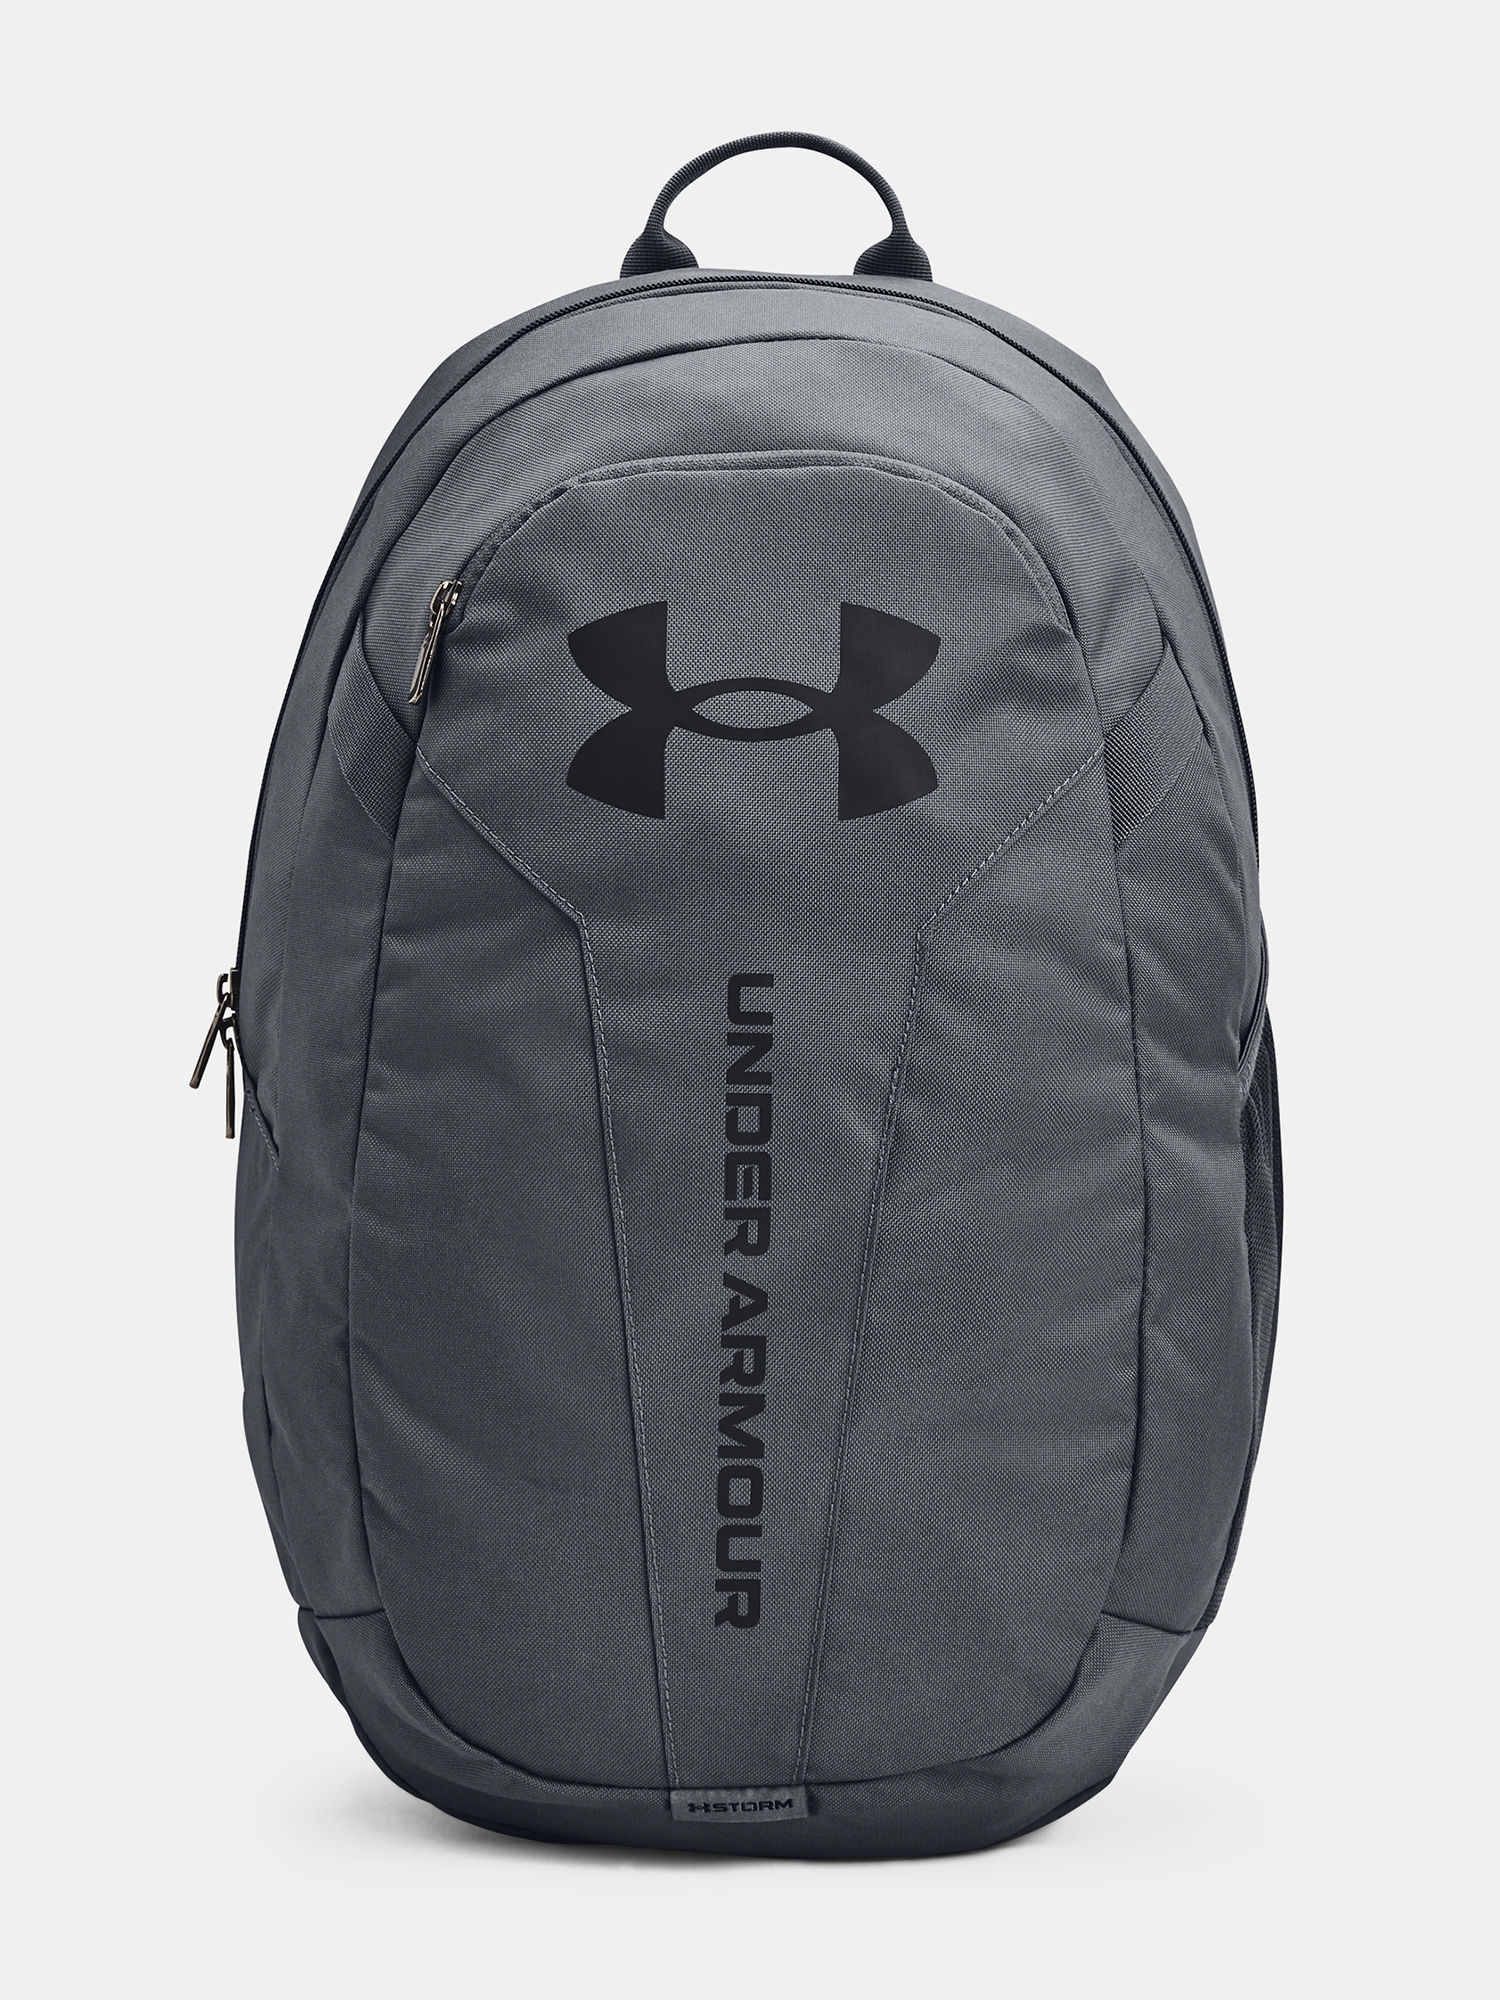 Batoh Under Armour Hustle Lite Backpack-GRY (1)